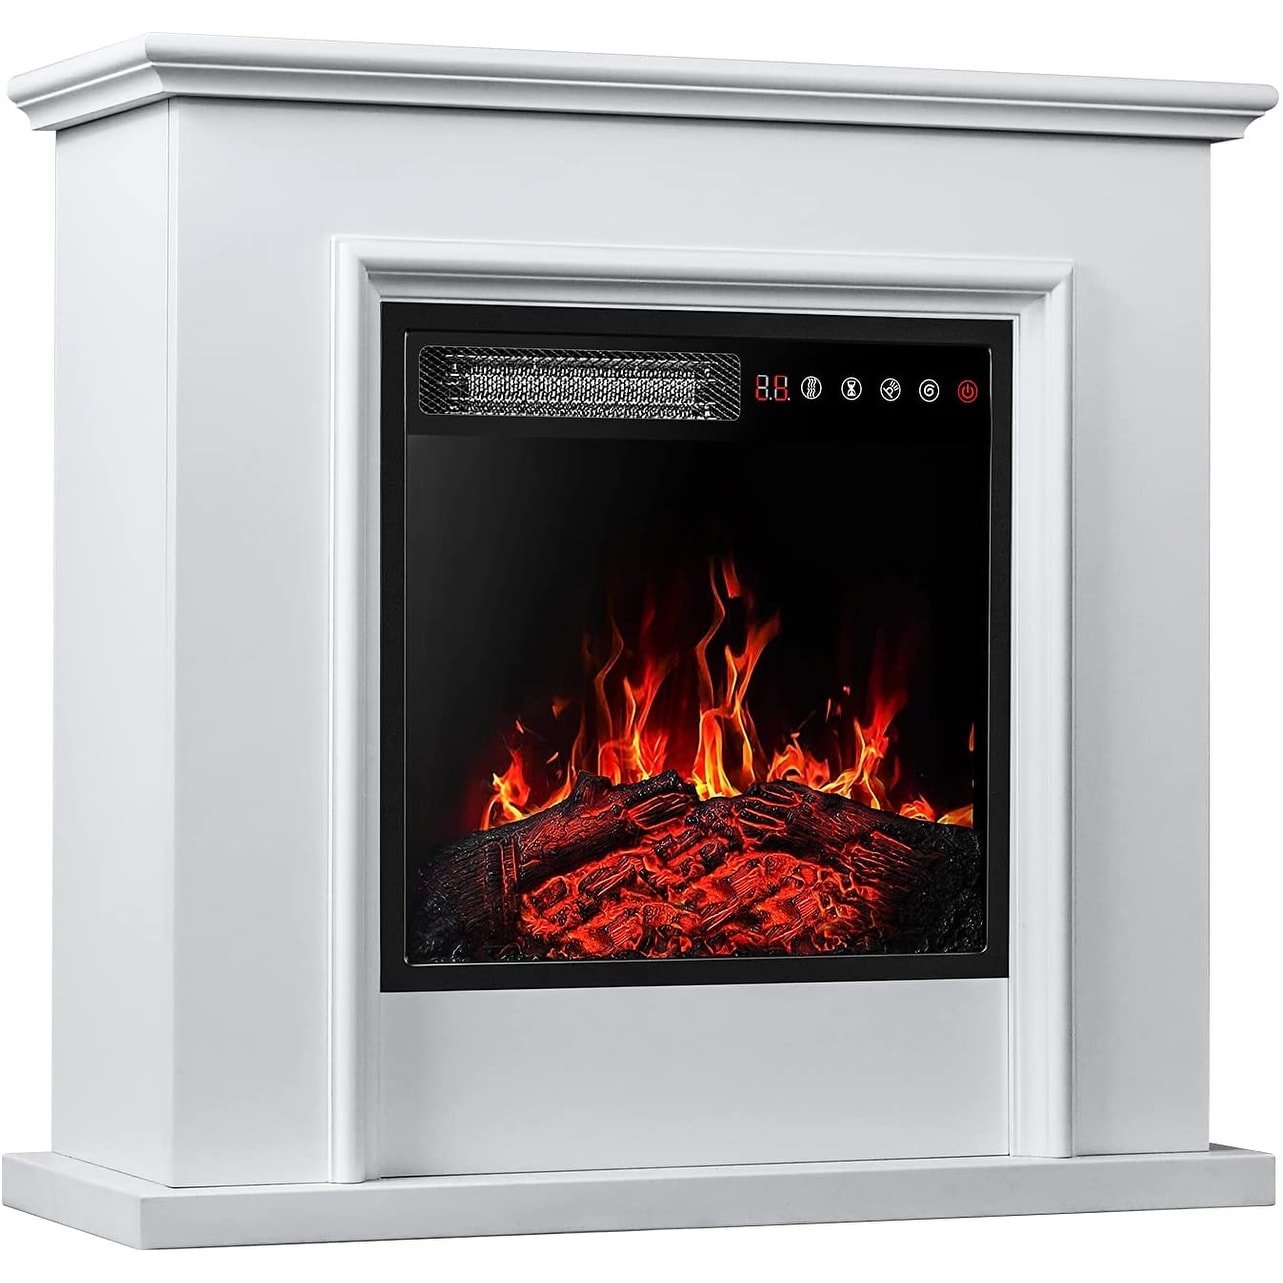 Bossin 32 inch Mantel with 27 inch 1500W Electric Fireplace, Package Freestanding Fireplace Heater Corner Firebox